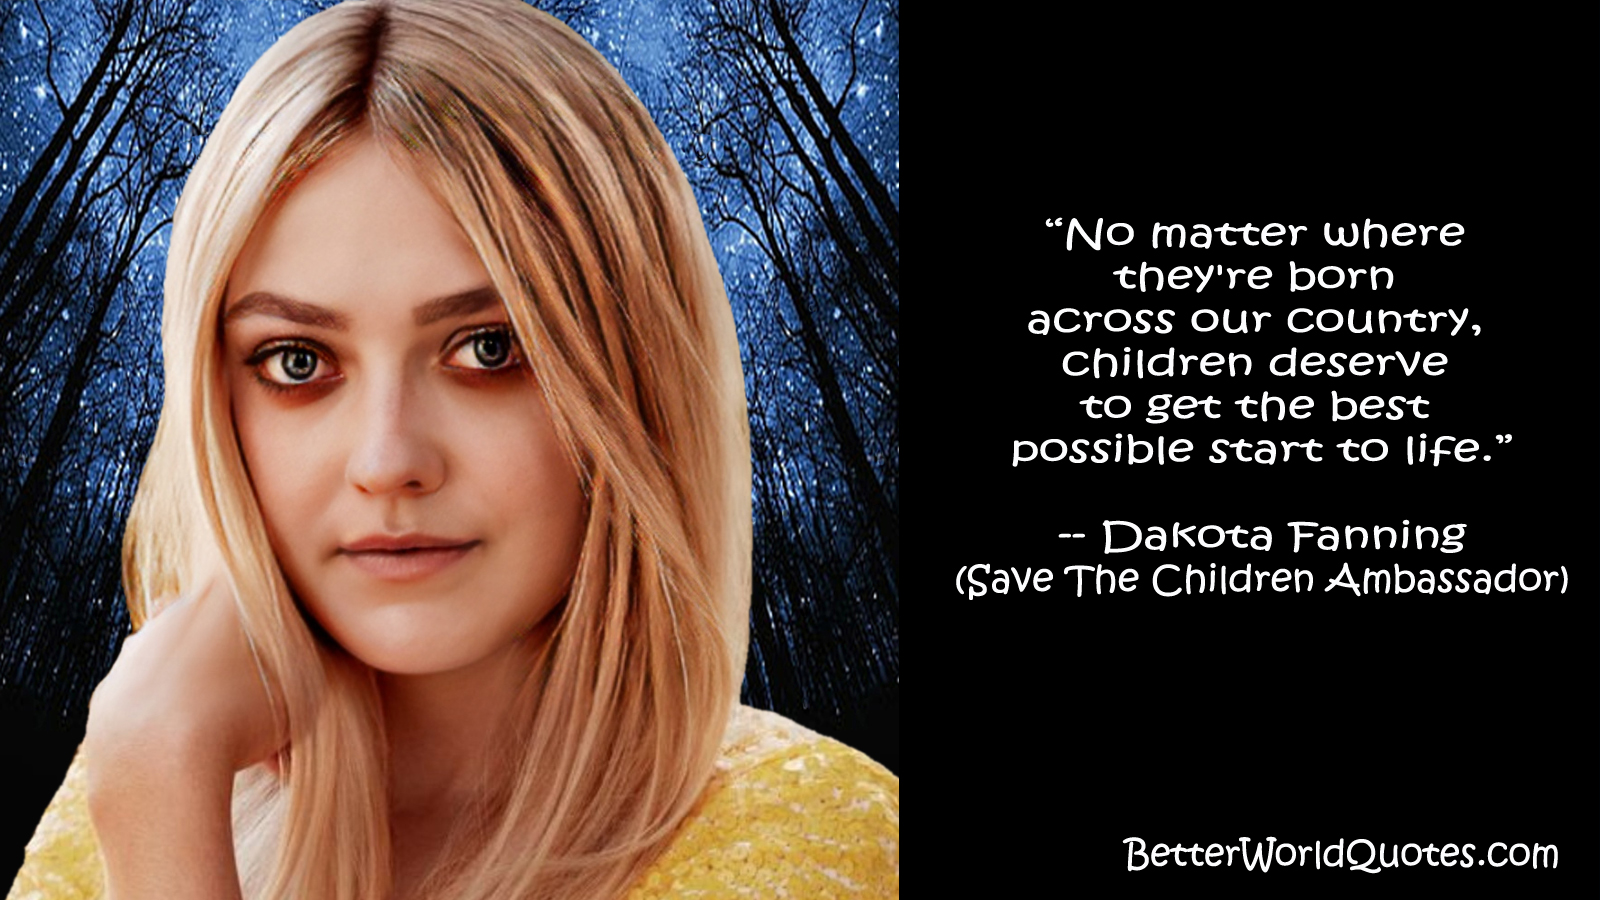 Dakota Fanning: No matter where they're born across our country, children deserve to get the best possible start to life.